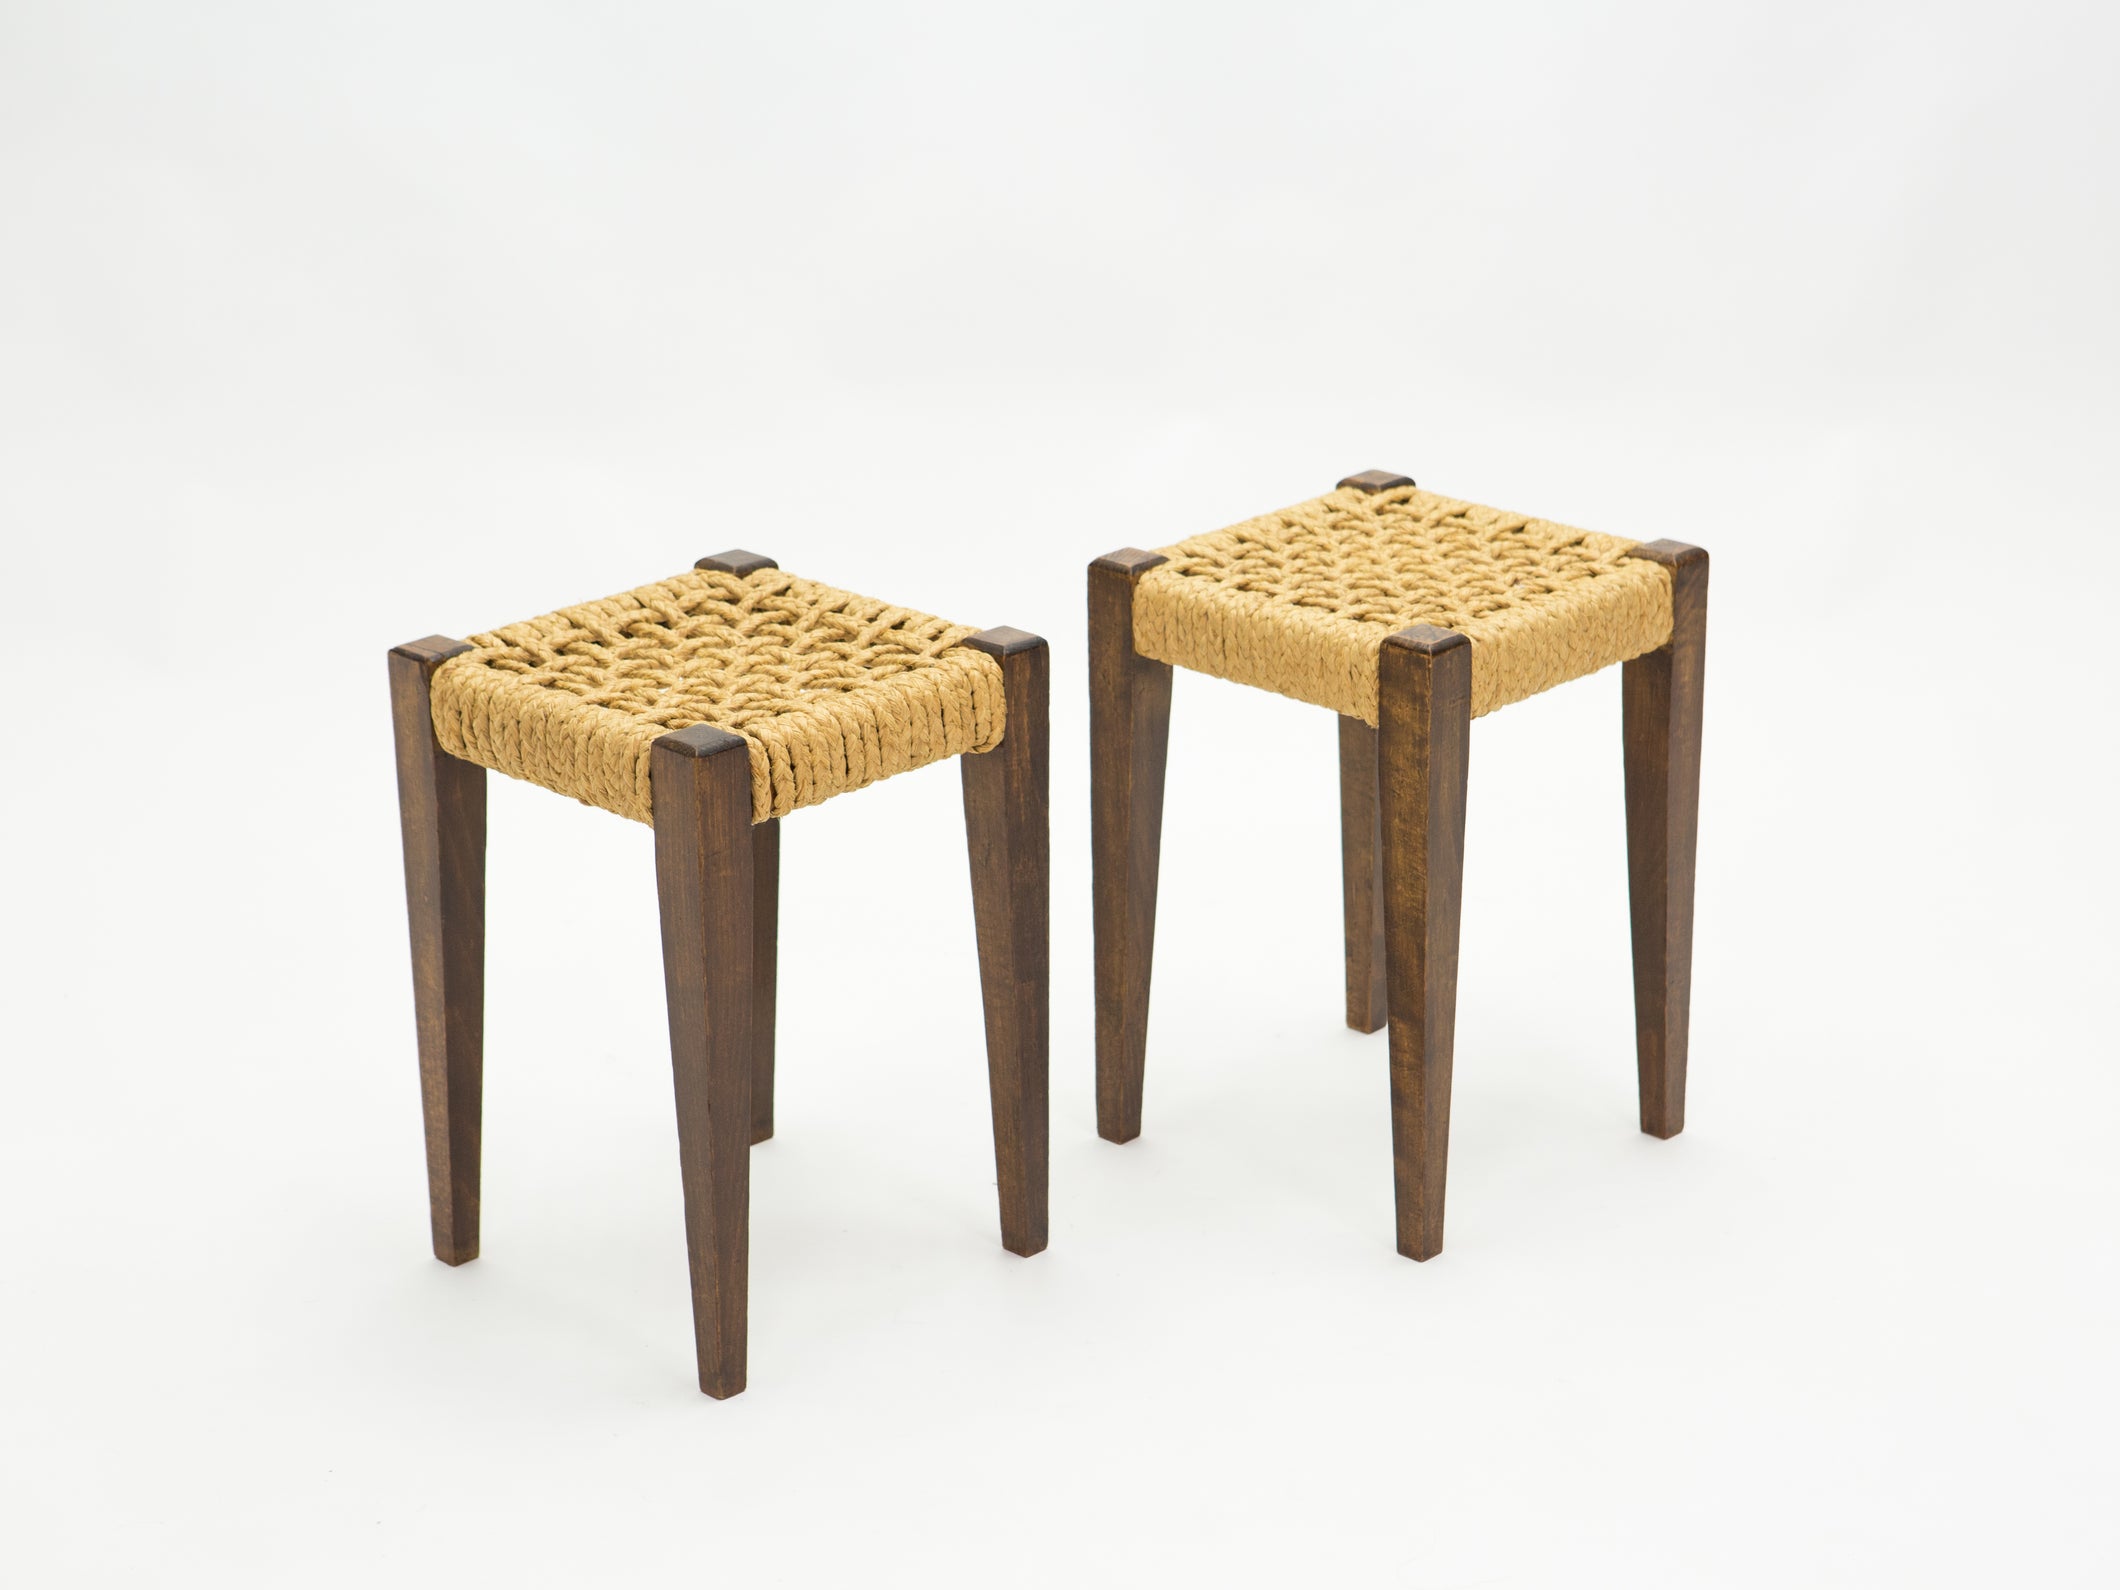 Pair of stools rope and oakwood by Audoux Minet 1950s